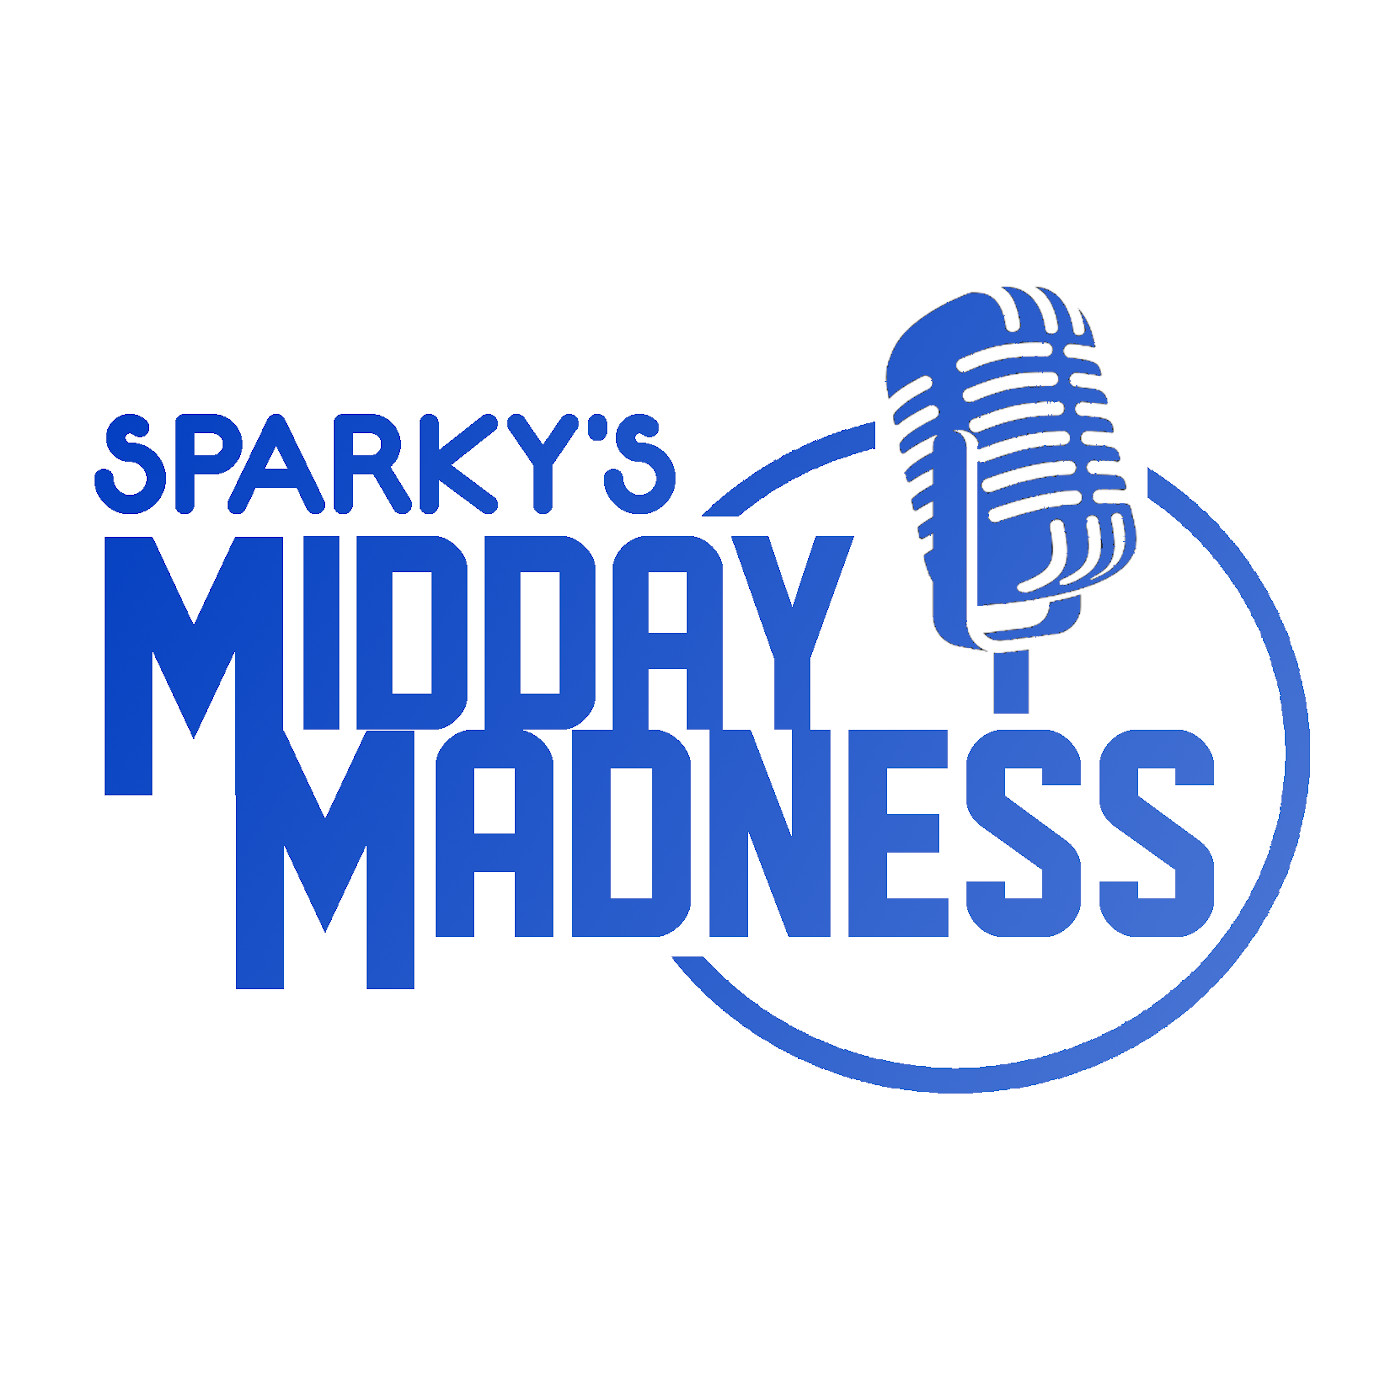 8-3-22 Sparky's Midday Madness